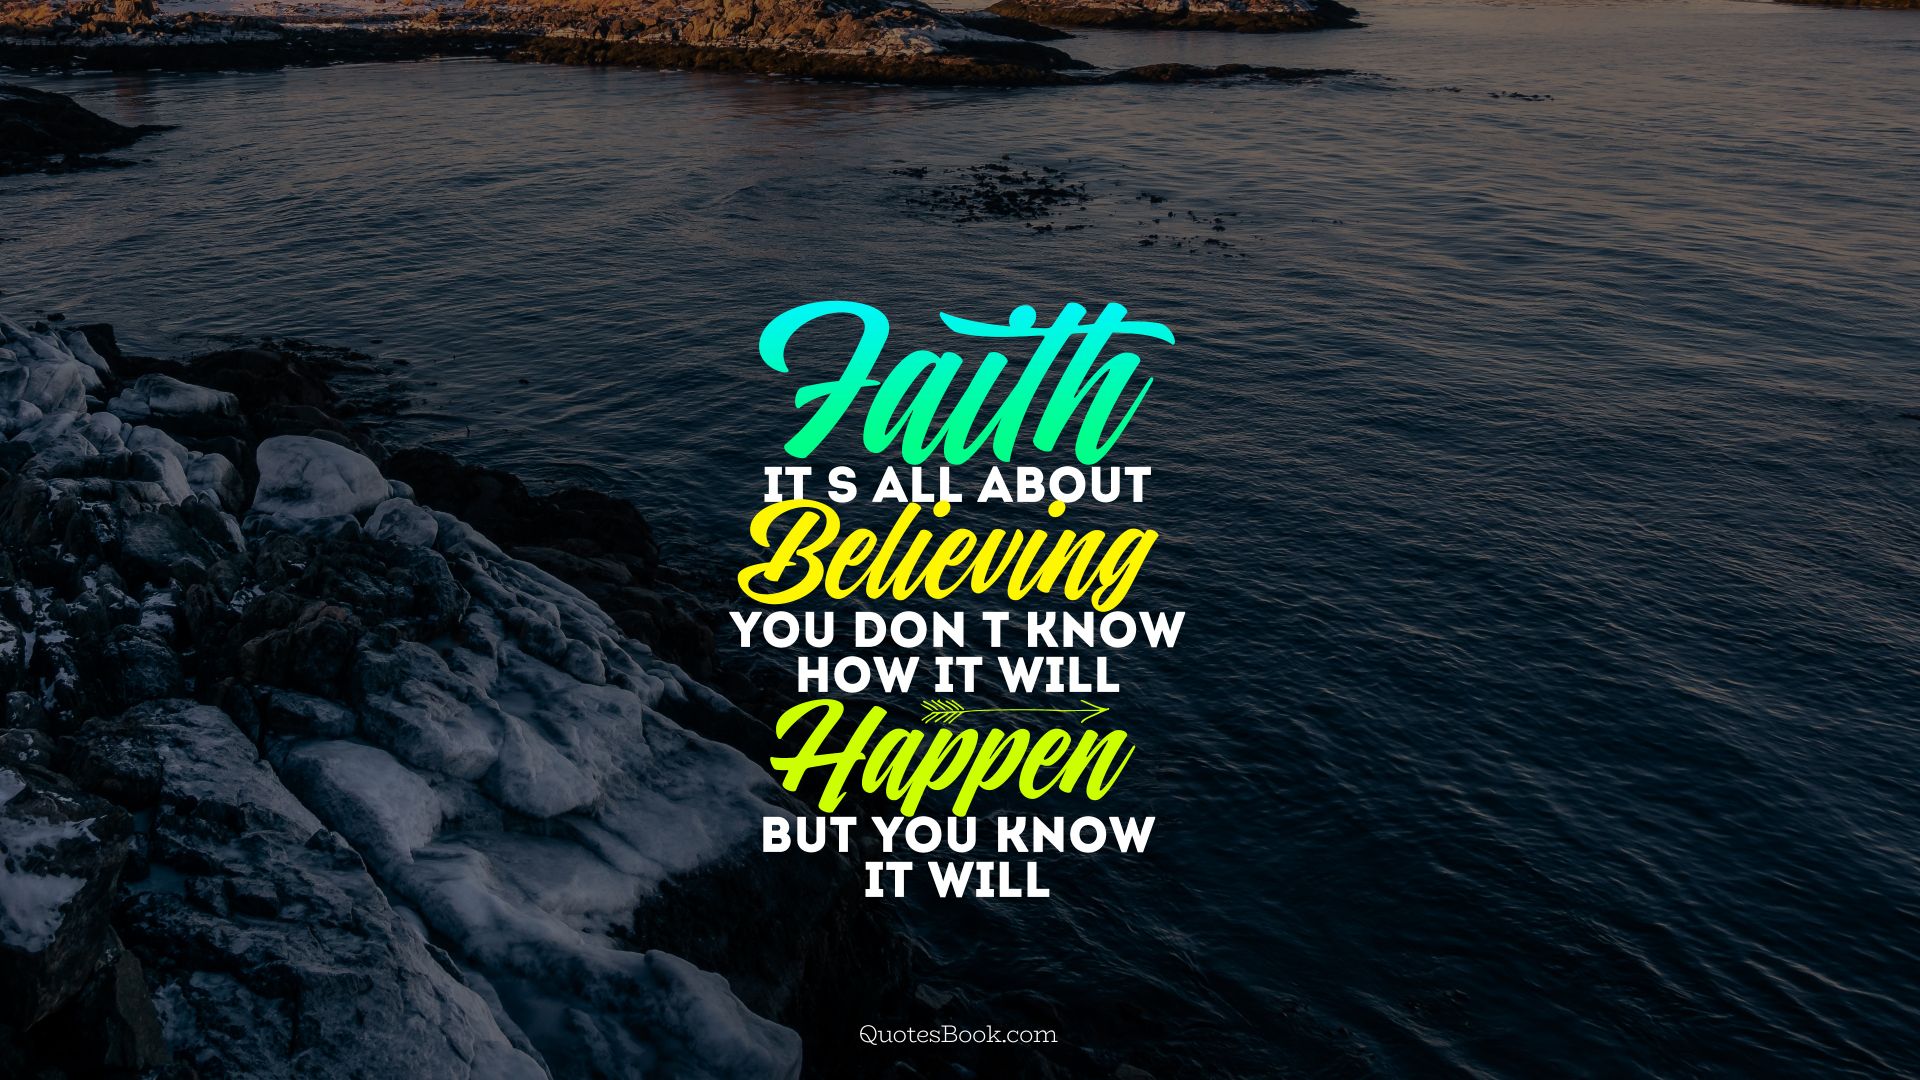 Faith it's all about believing you don't know how it will happen but you know it will